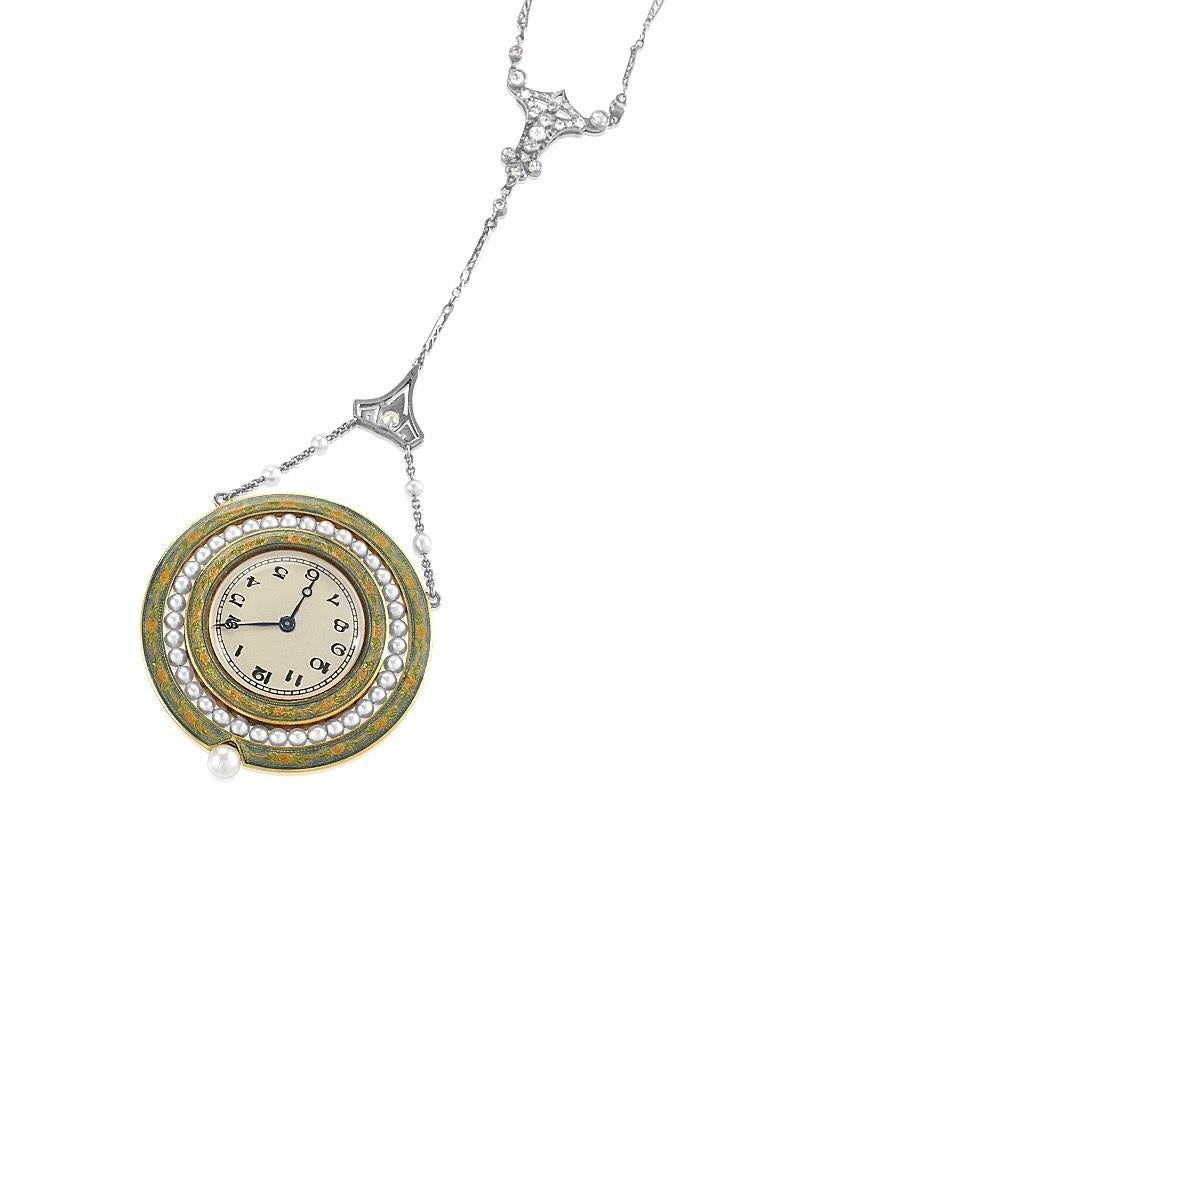 A French Belle Epoque 18 karat gold, platinum, diamond, pearl and Paillet enamel pendant watch necklace.  The pendant watch has 26 old European-cut diamonds with an approximate total weight of 1.05 carats, 70 rose-cut diamonds with an approximate